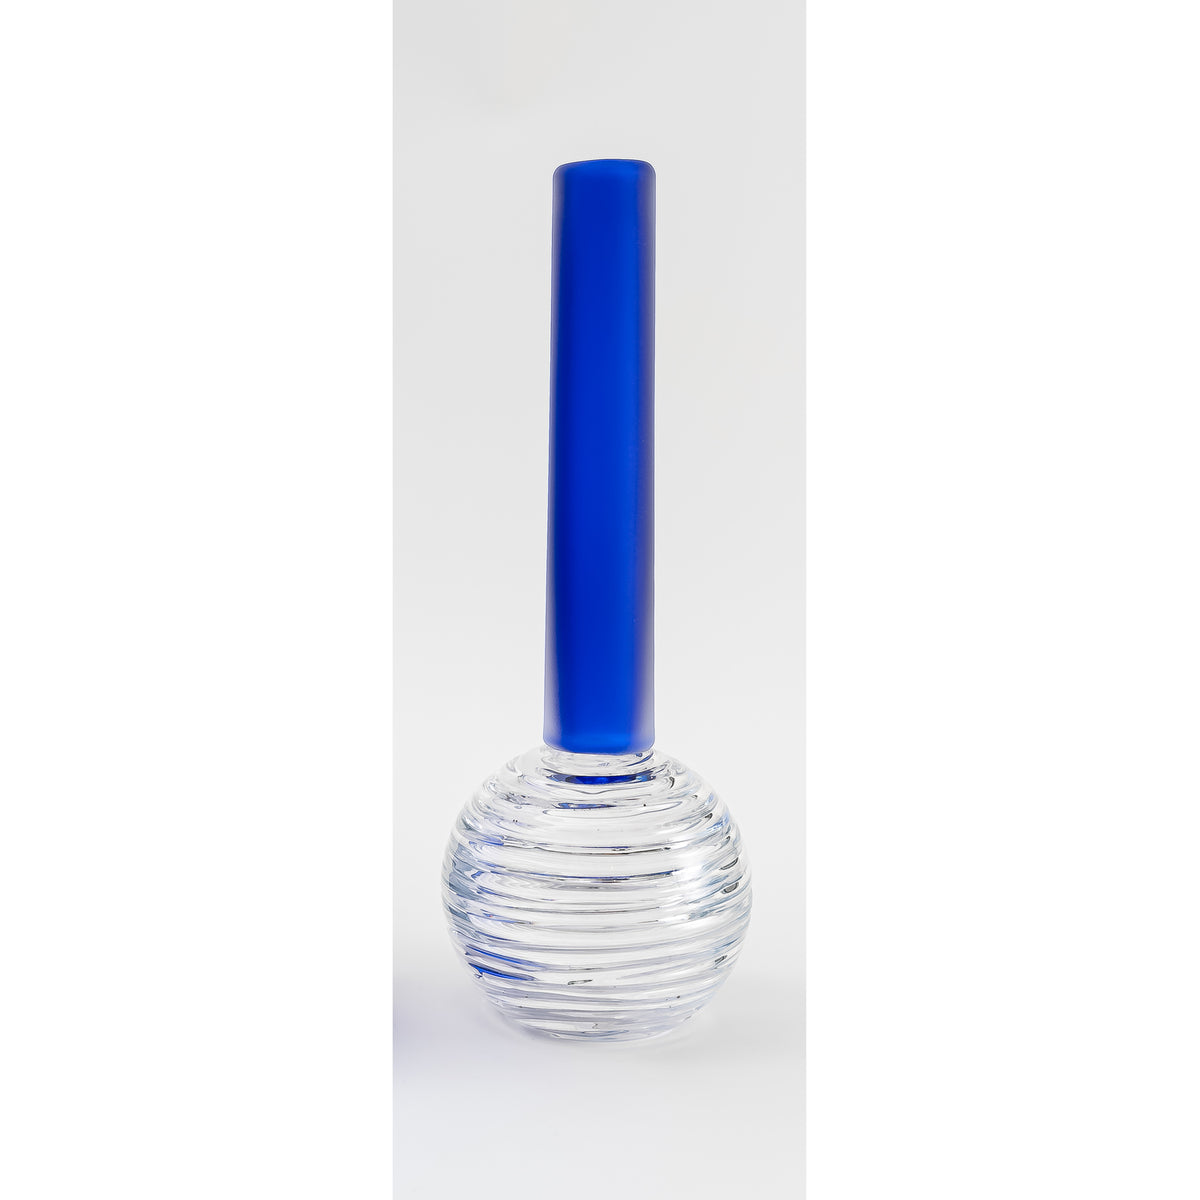 Jaan Andres-Potions Sari Blue Sm Sphere